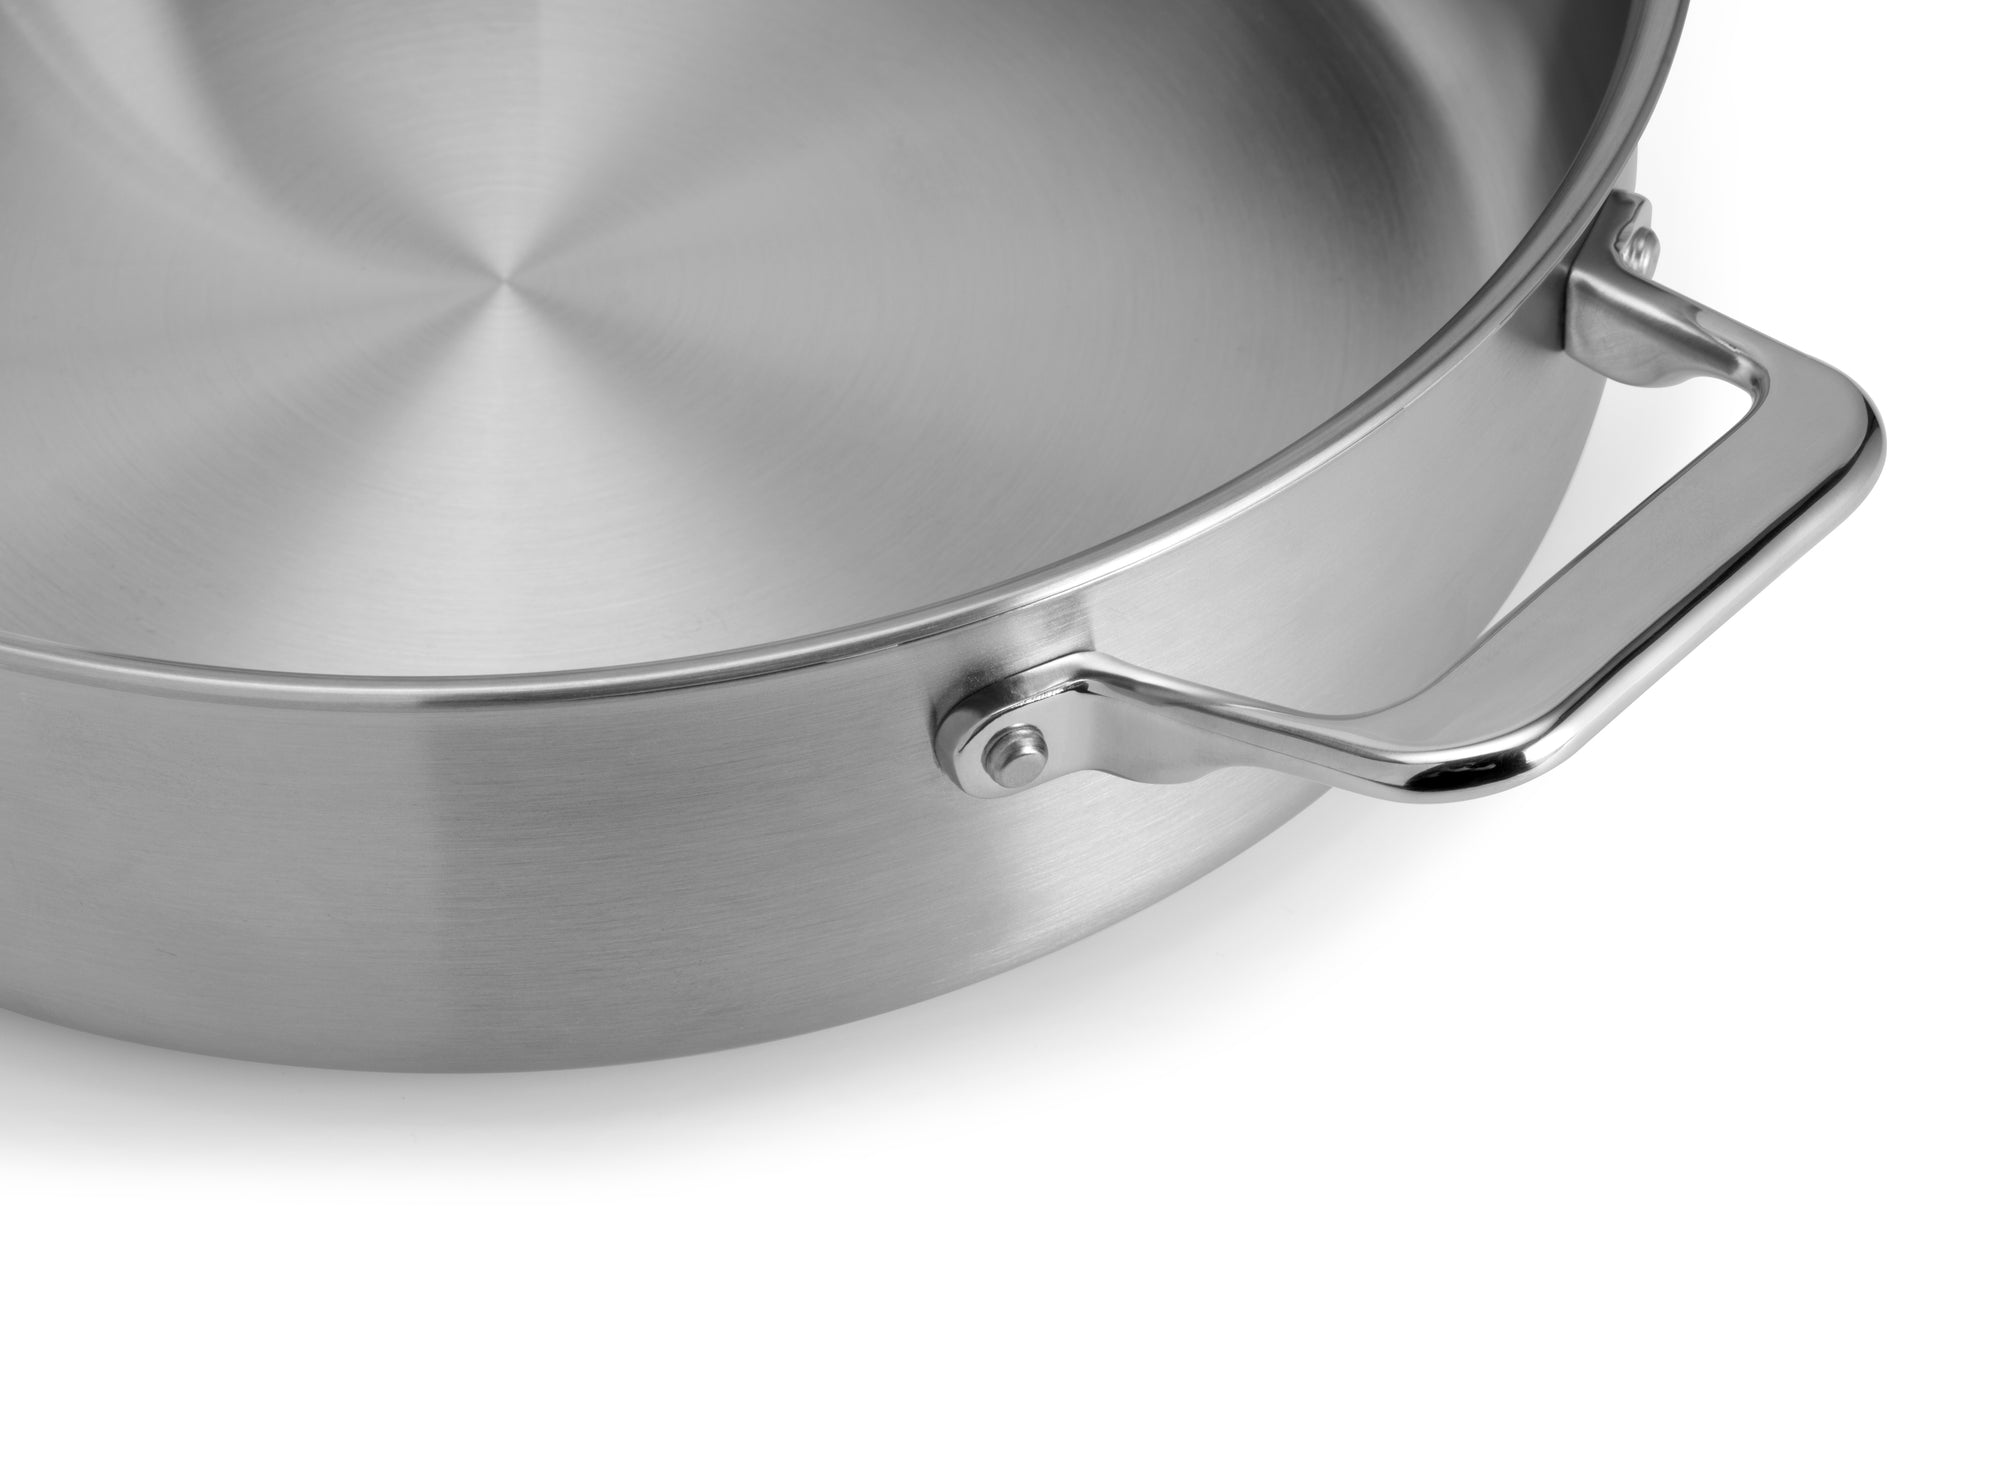 Misen 3 QT Stainless Steel Saucier Pan with Lid - 5-Ply Steel